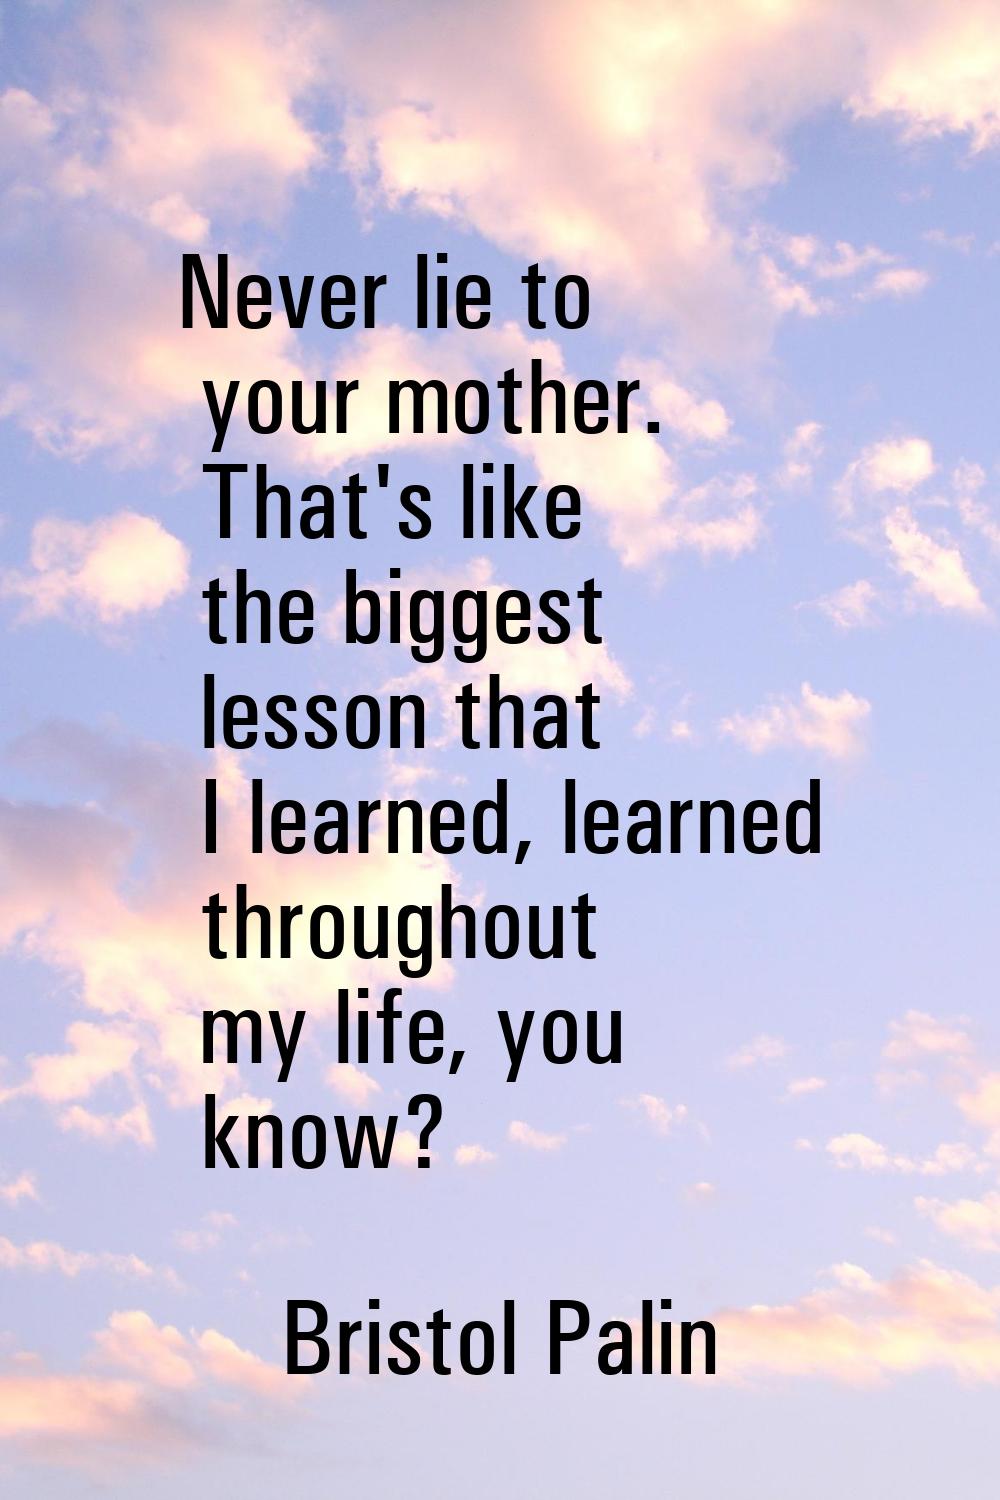 Never lie to your mother. That's like the biggest lesson that I learned, learned throughout my life